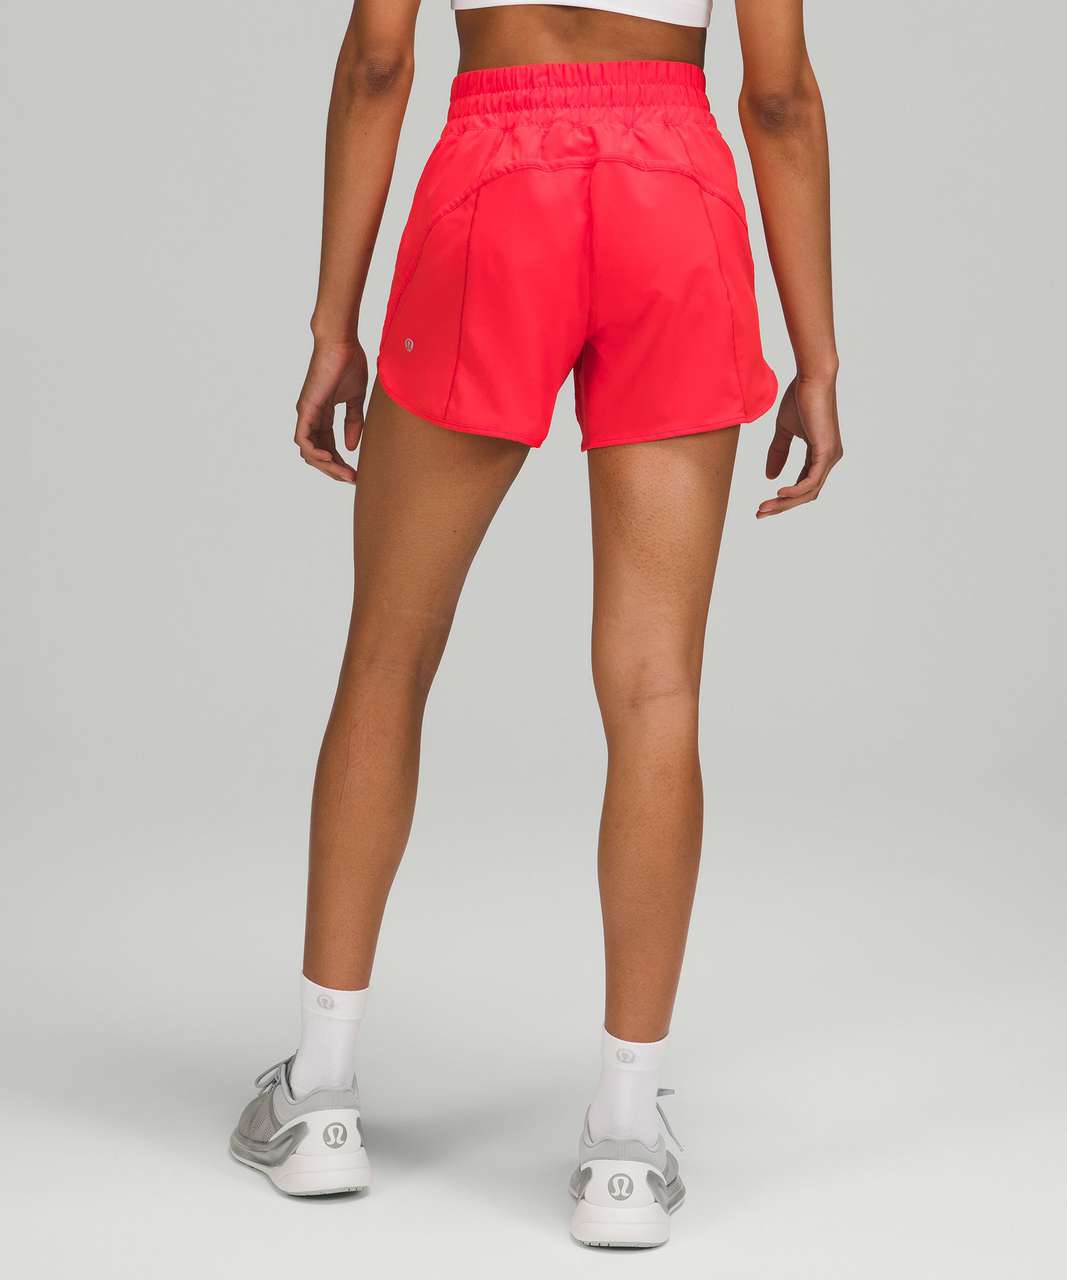 Lululemon Track That Mid-Rise Lined Short 5" - Love Red